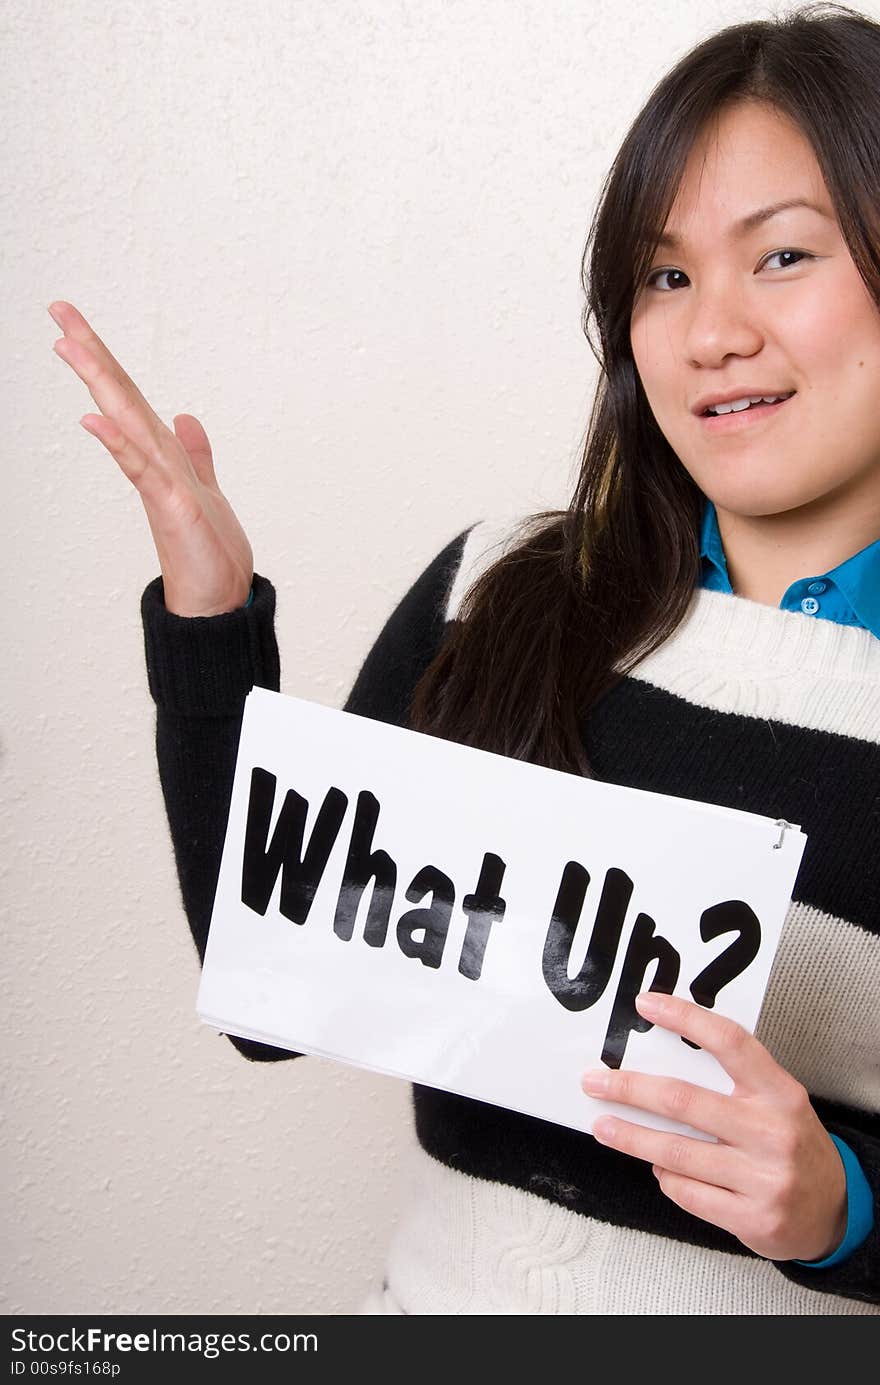 Female holding up a What up? sign with one hand. Female holding up a What up? sign with one hand.